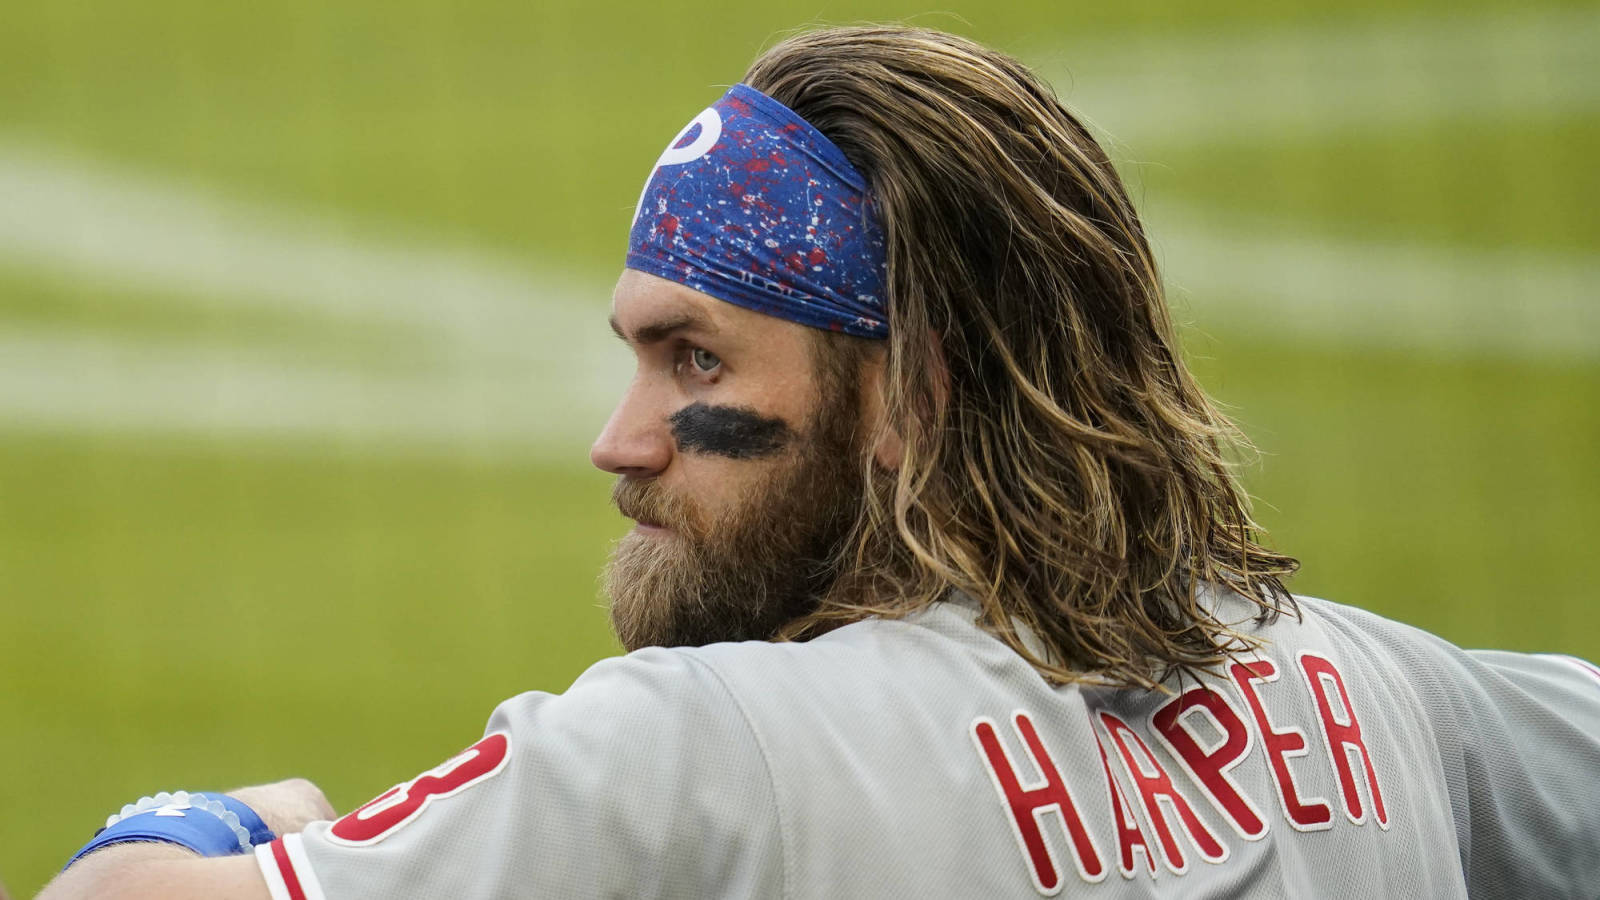 Bryce Harper cuts long hair day after being ejected | Yardbarker